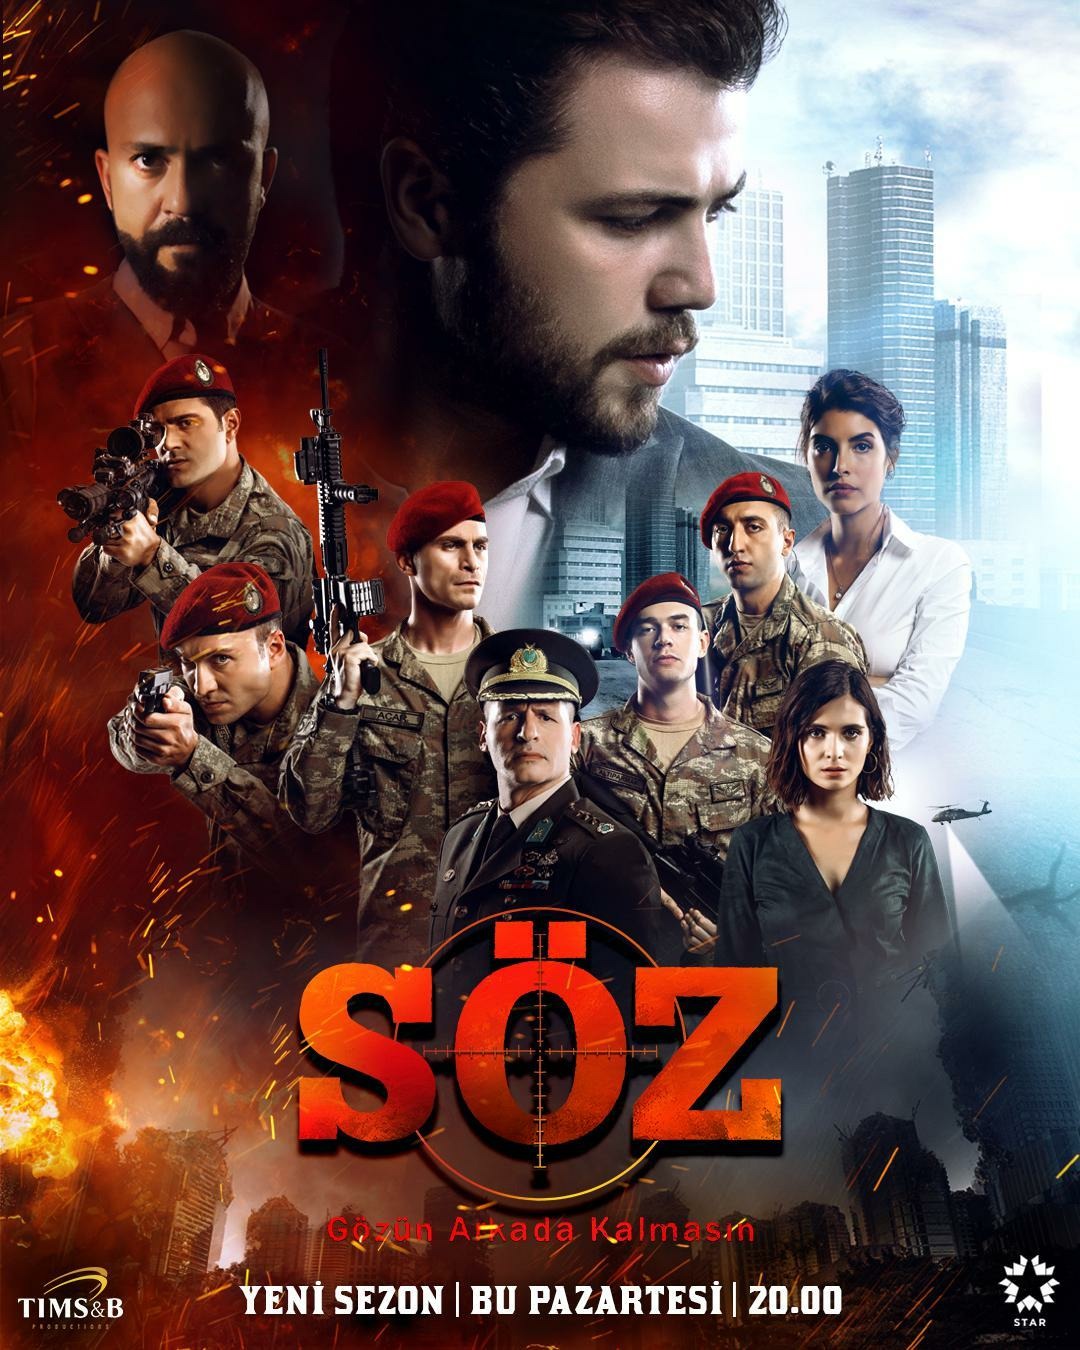 Extra Large TV Poster Image for Söz 